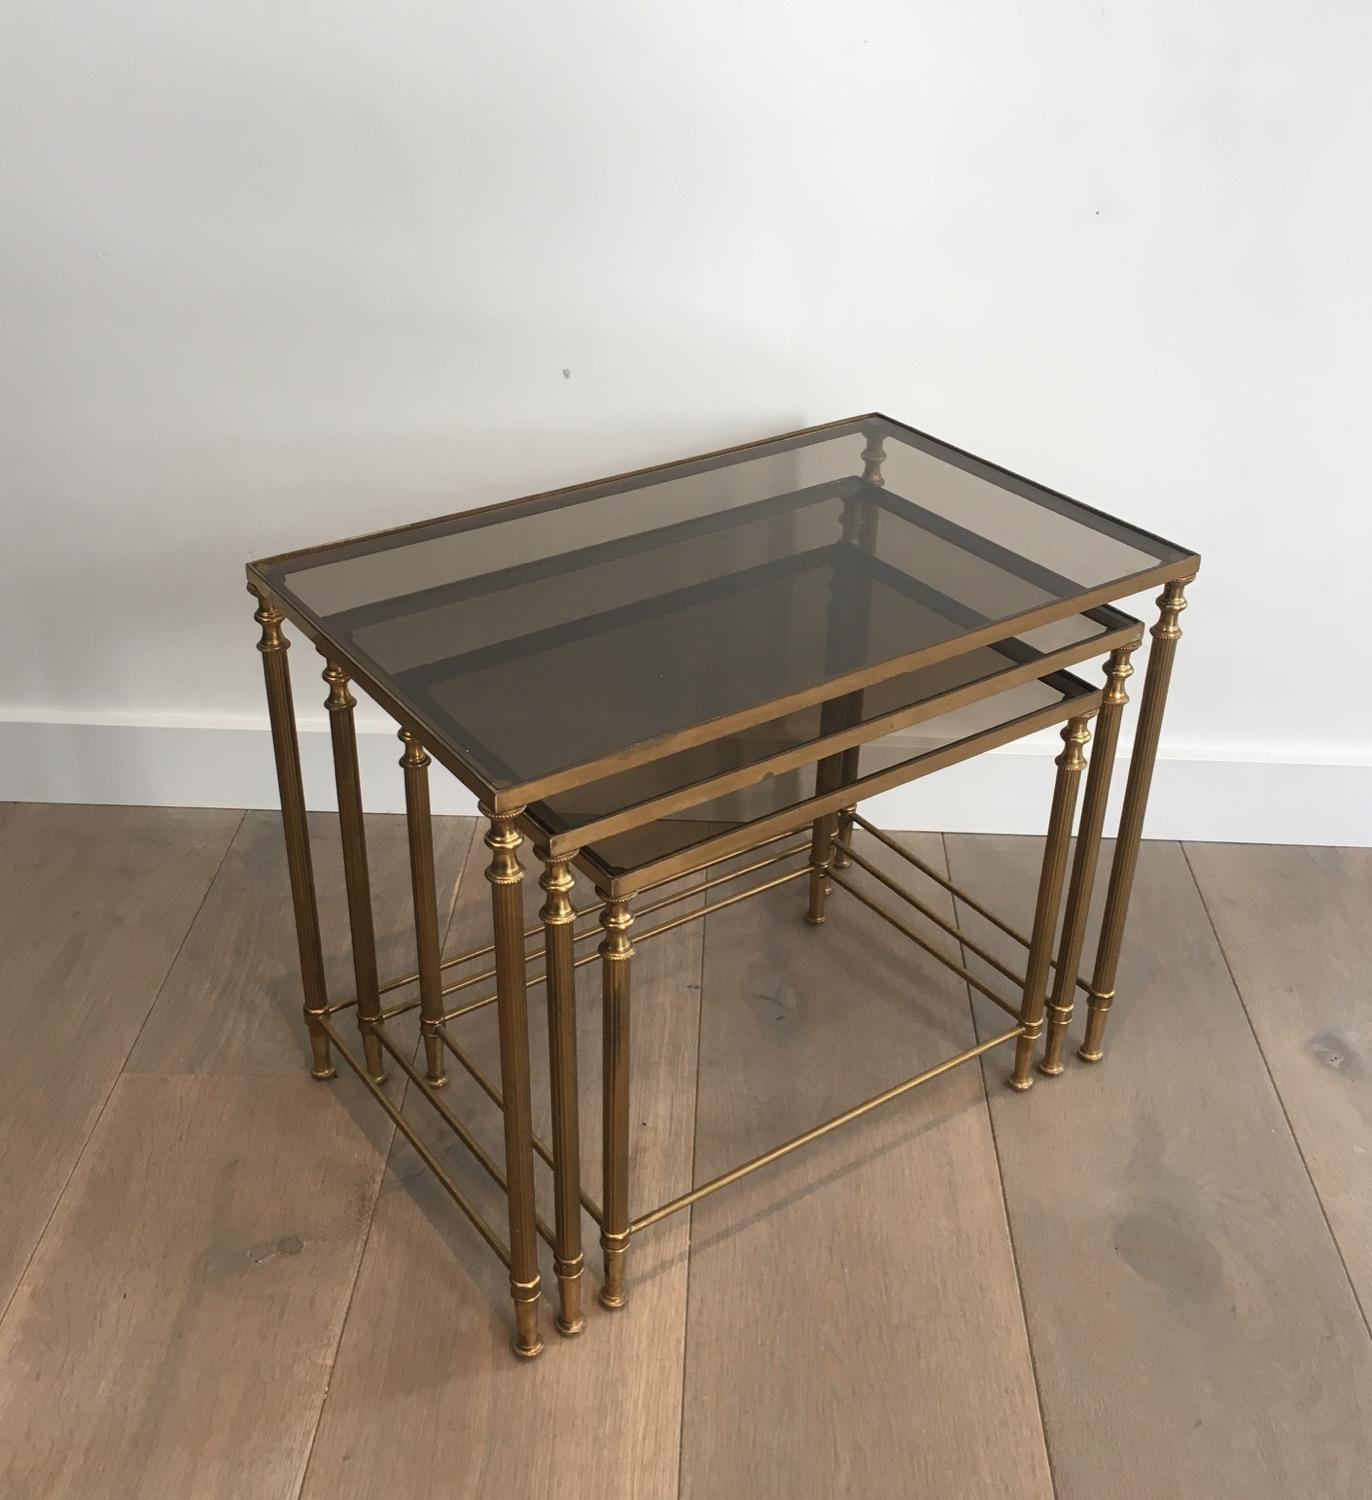 In the style of Maison Jansen. Set of 3 neoclassical brass nesting tables with fluted legs and smoked glass shelves, French, circa 1940.